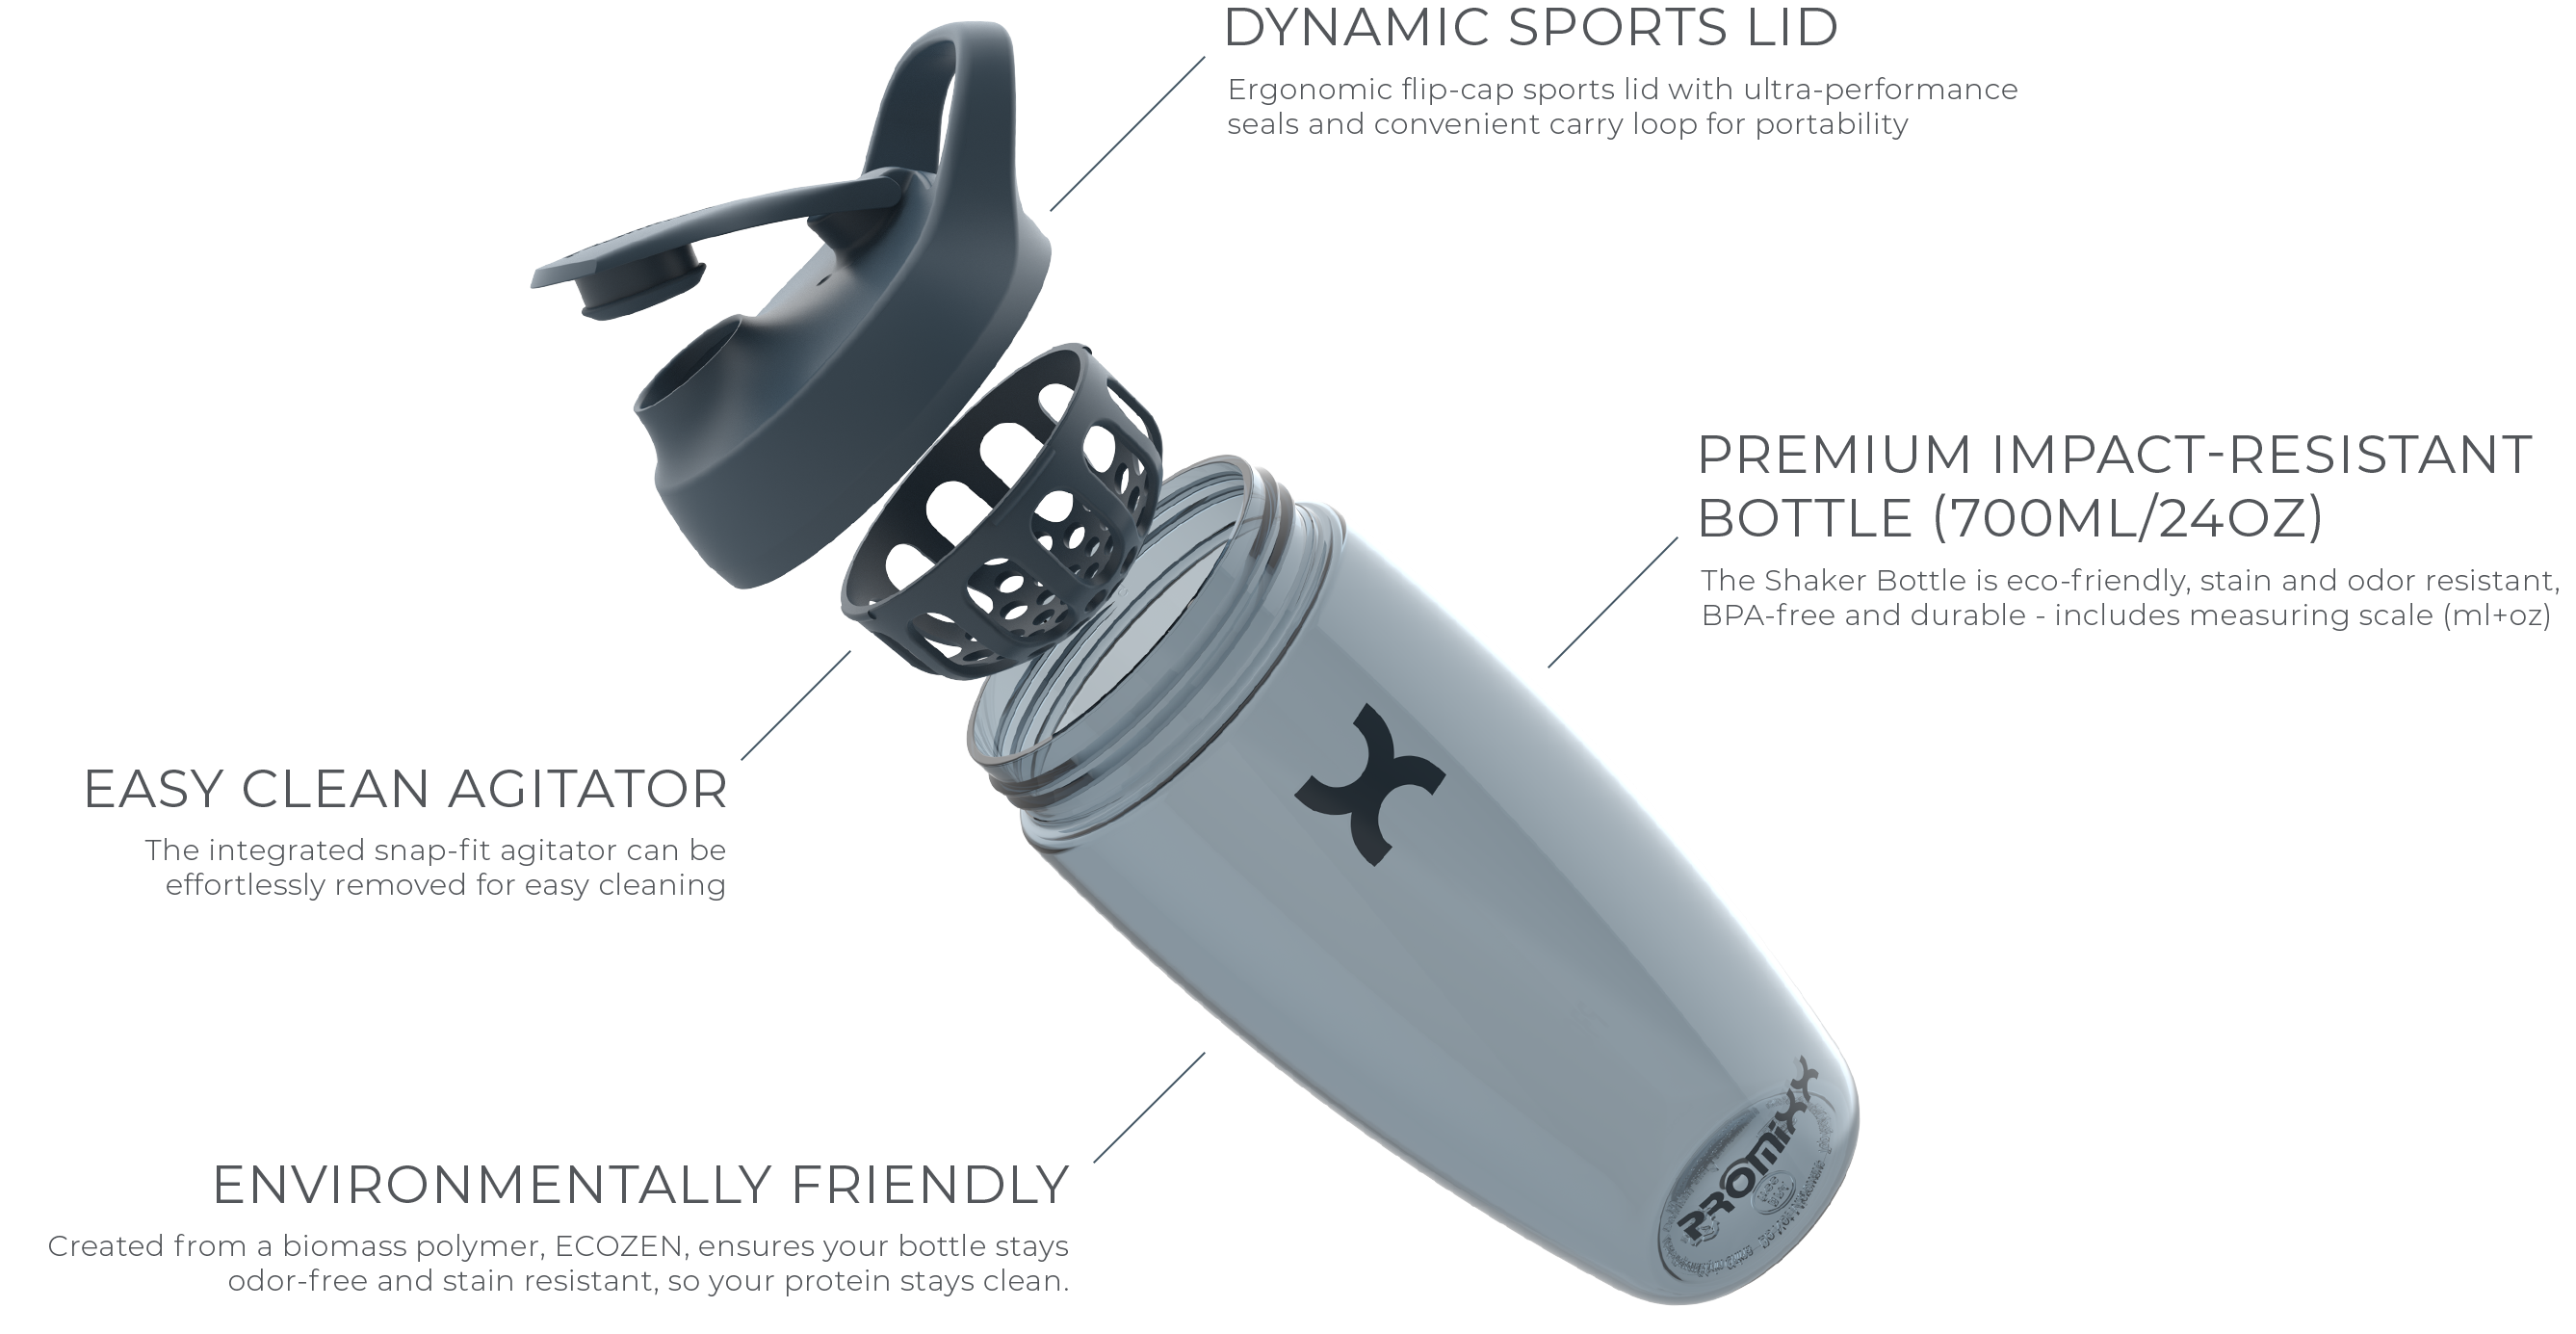 Promixx Pursuit Protein Shaker Bottle – Premium Sports Blender Bottles for Protein Mixes and Supplement Shakes – Easy Clean, Durable Protein Shaker